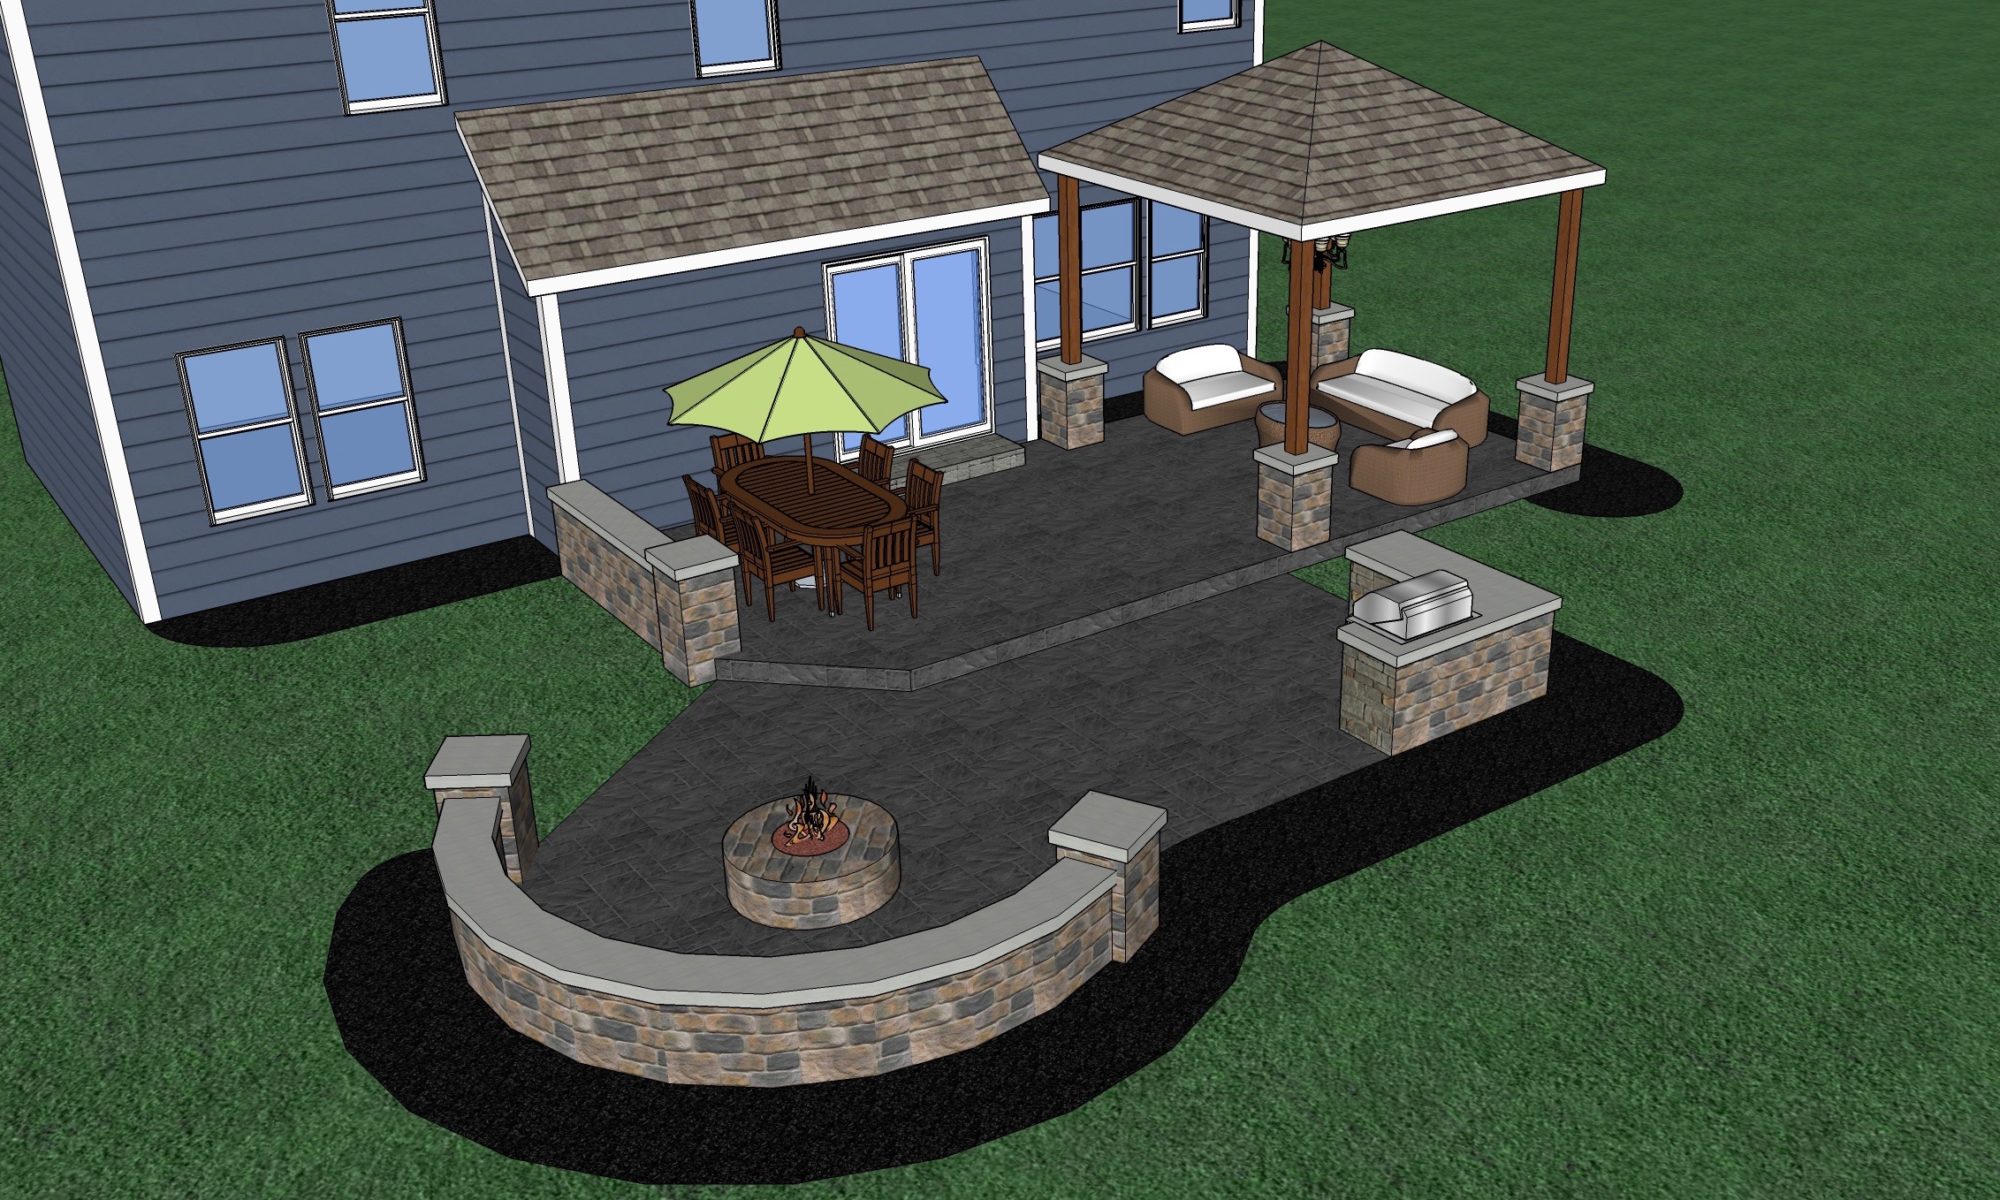 Greenwood Patio, Pergola and Fire Pit Precision outdoors design custom unilock paver patio cedar pergola base additions personal fire pit seating wall